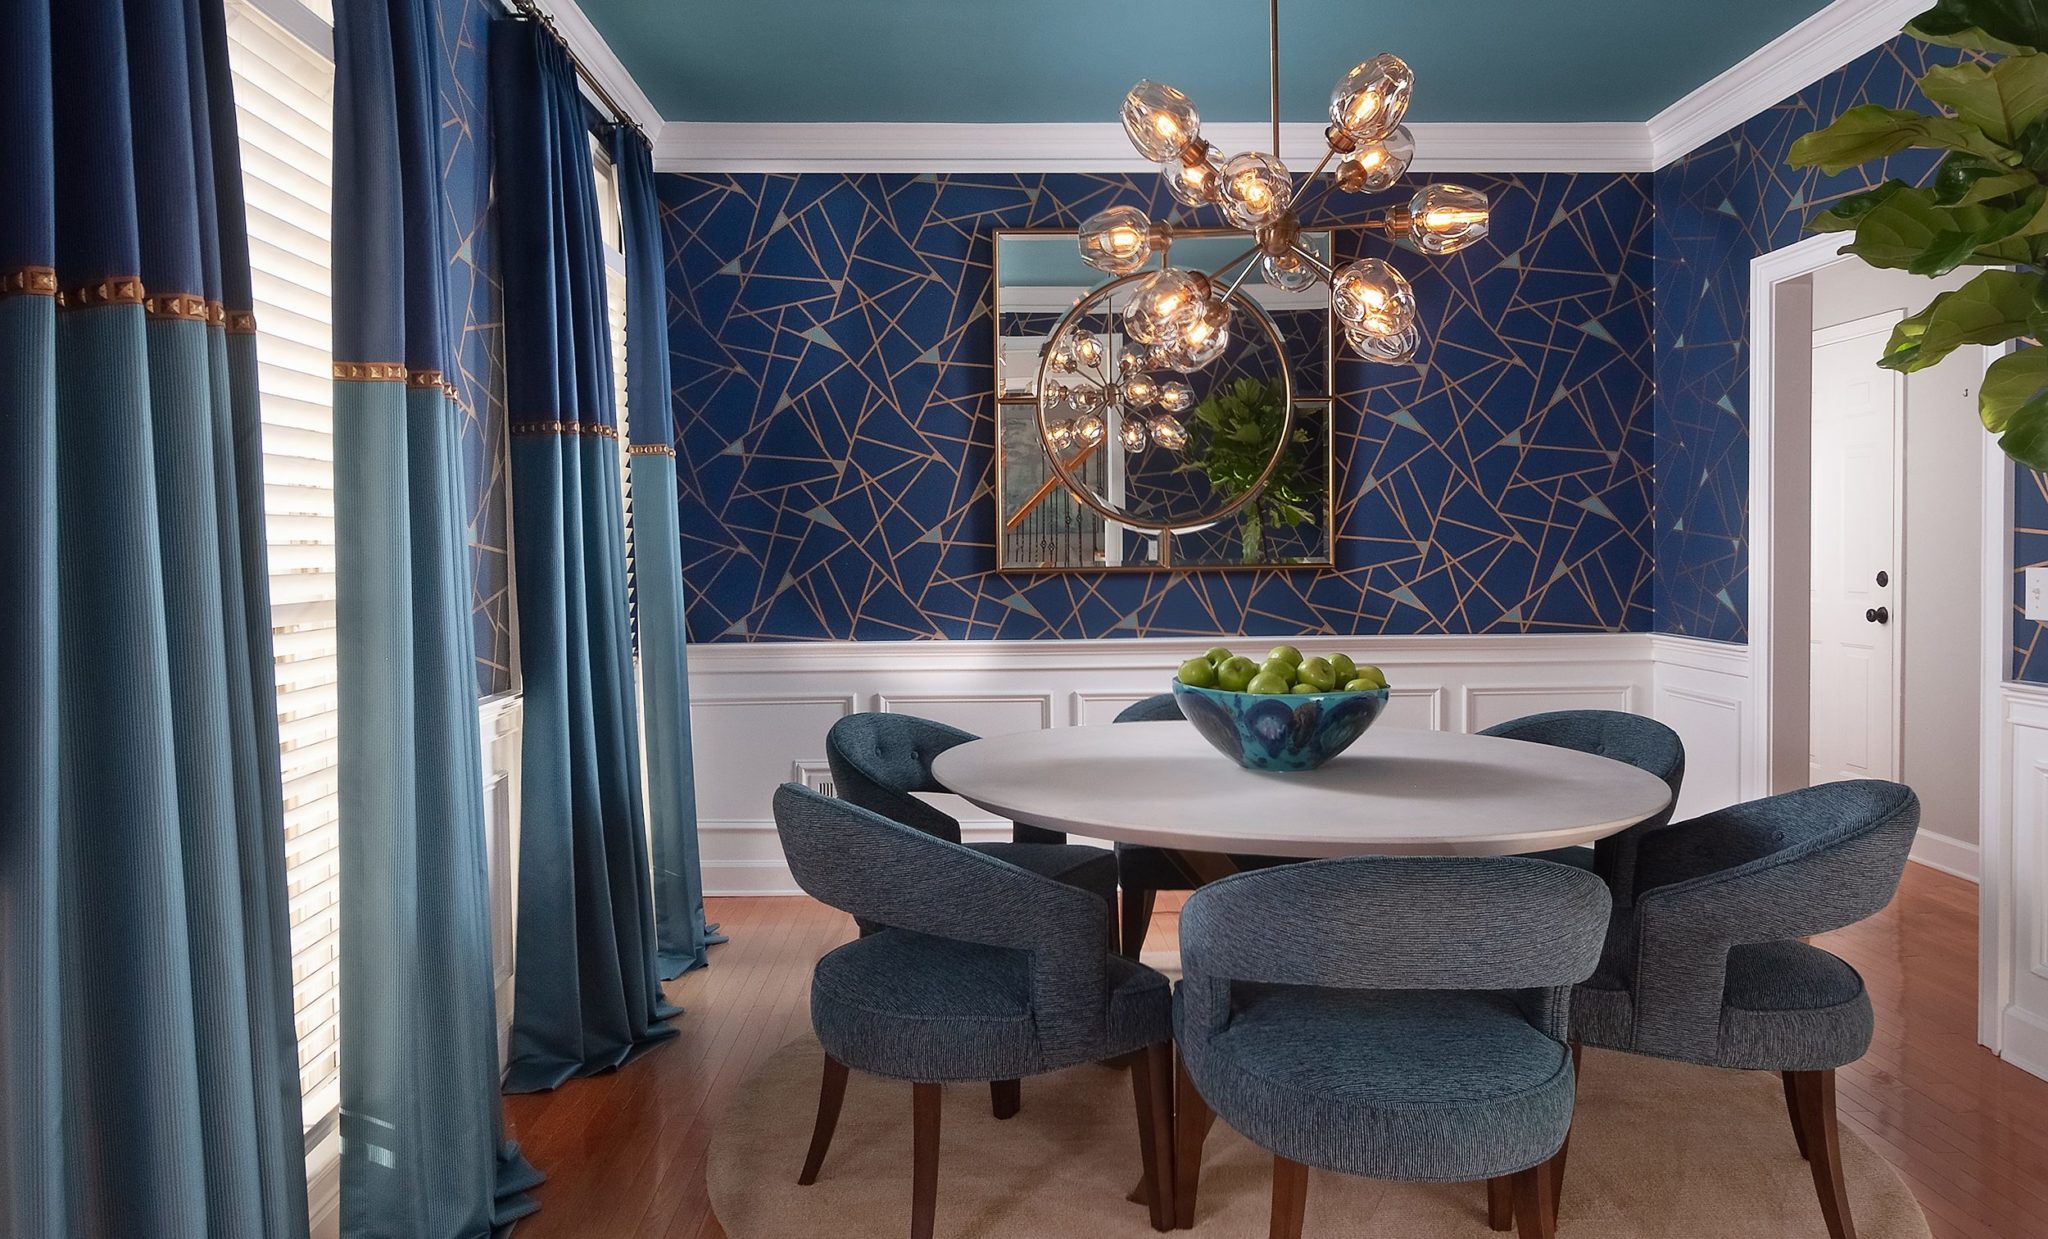 How to encourage more traffic in your dining room